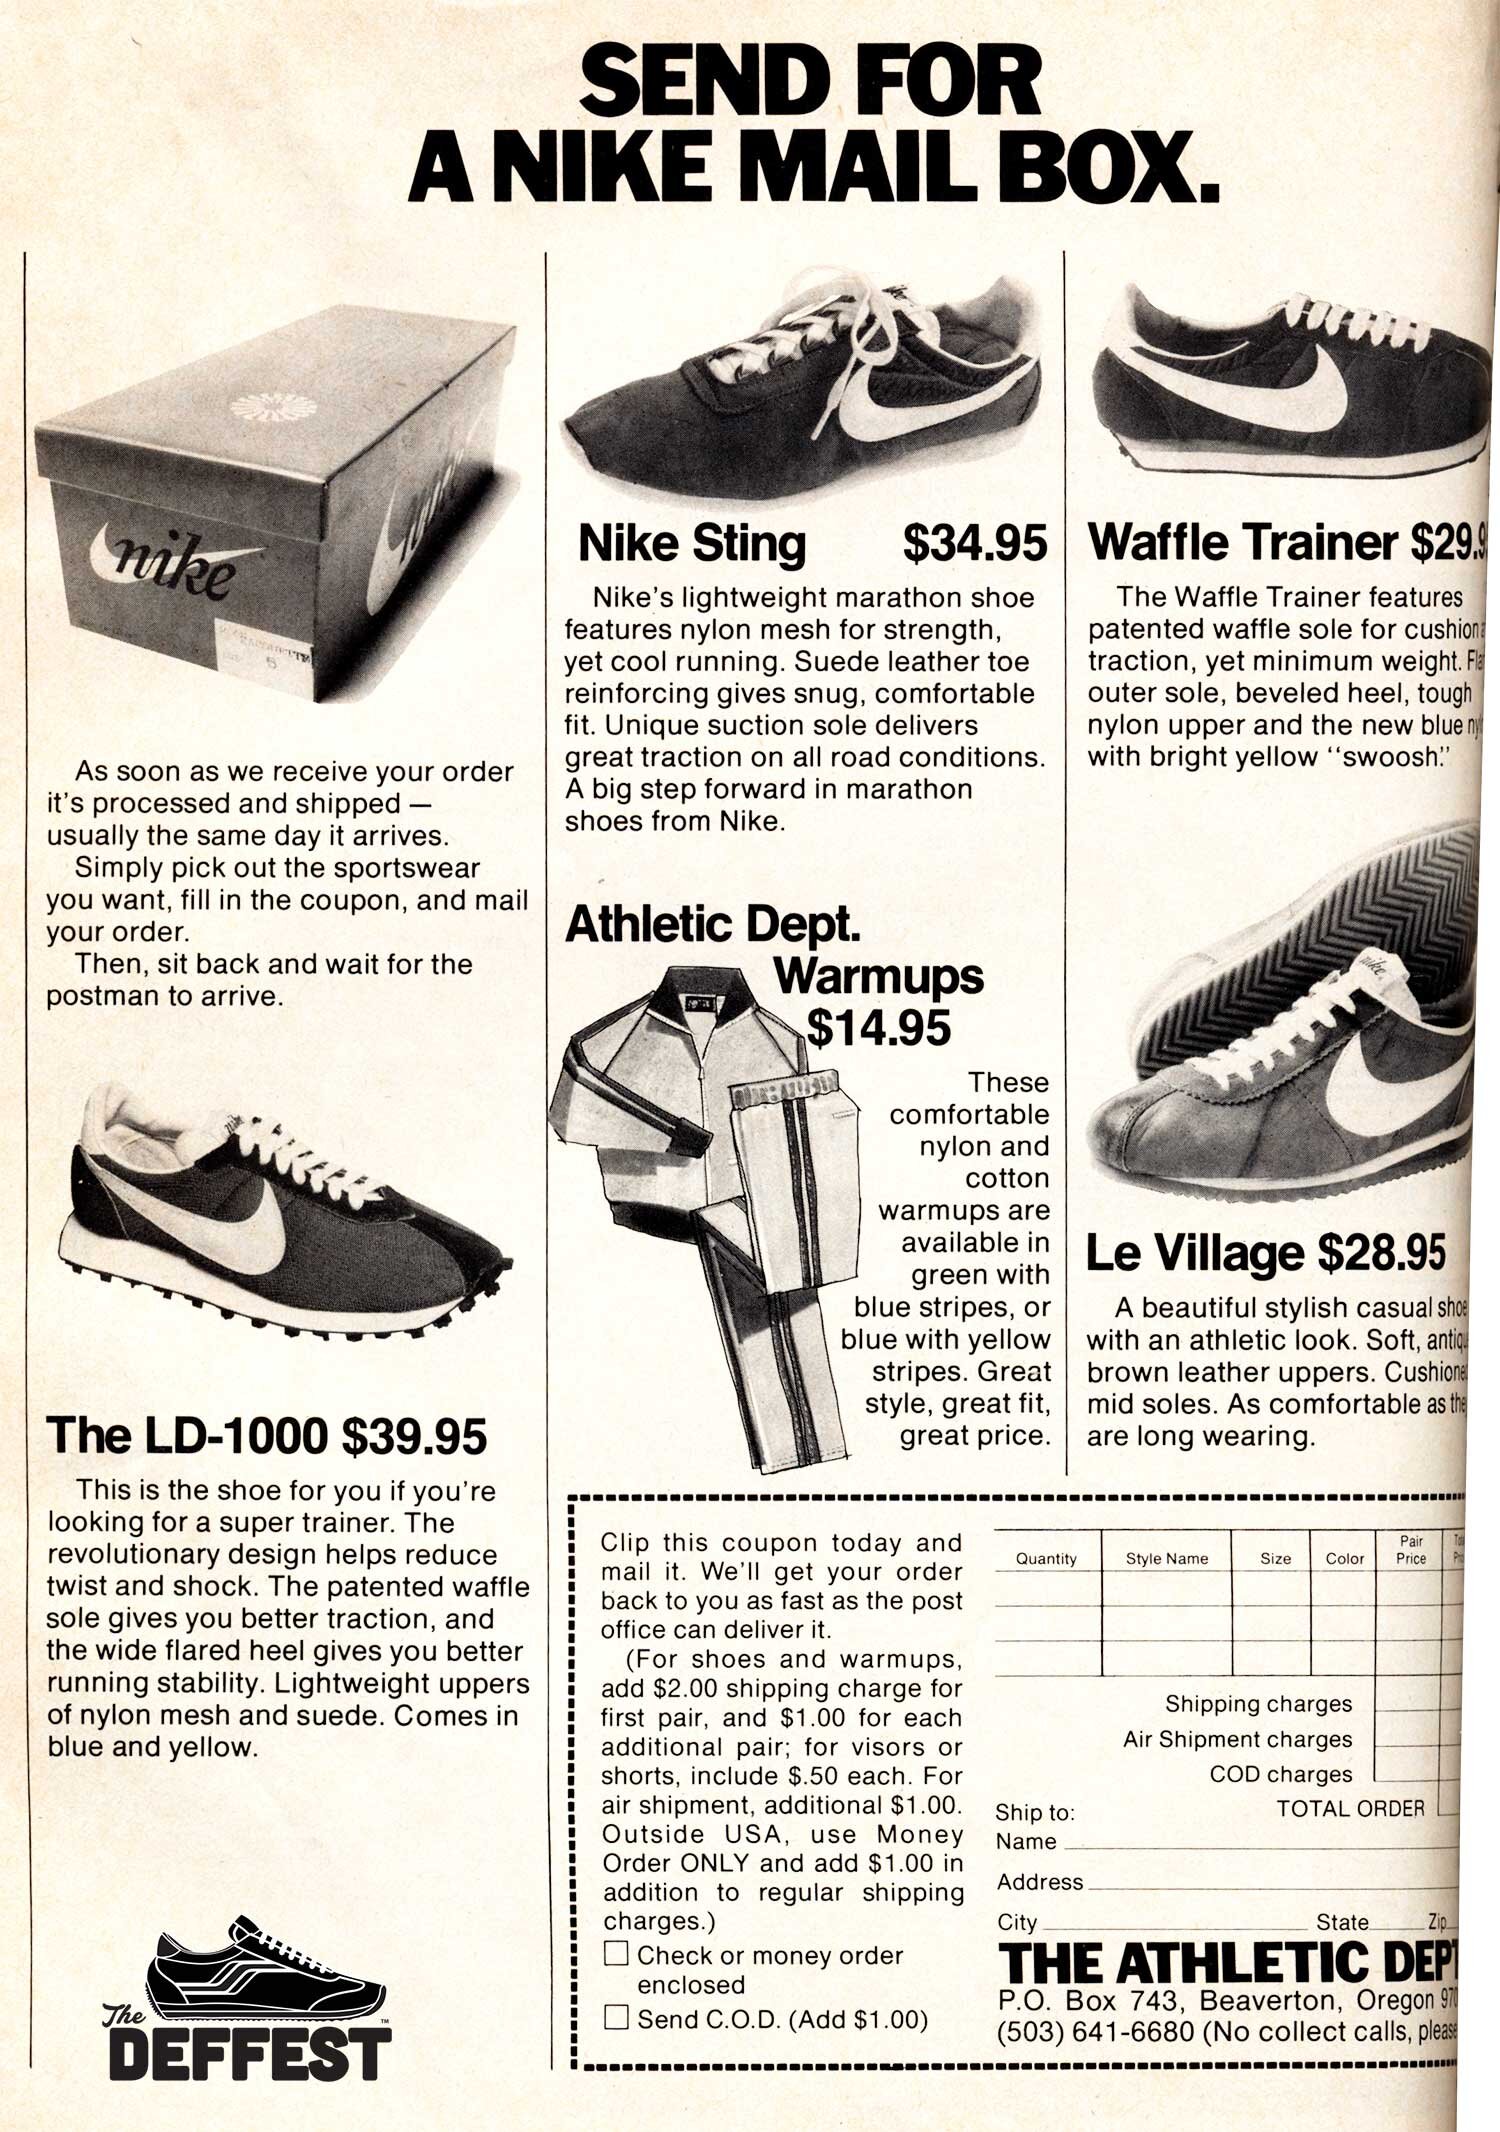 The Deffest®. A vintage and retro sneaker — Vintage Nike Sting, Waffle trainer and Le Village 1977 ad